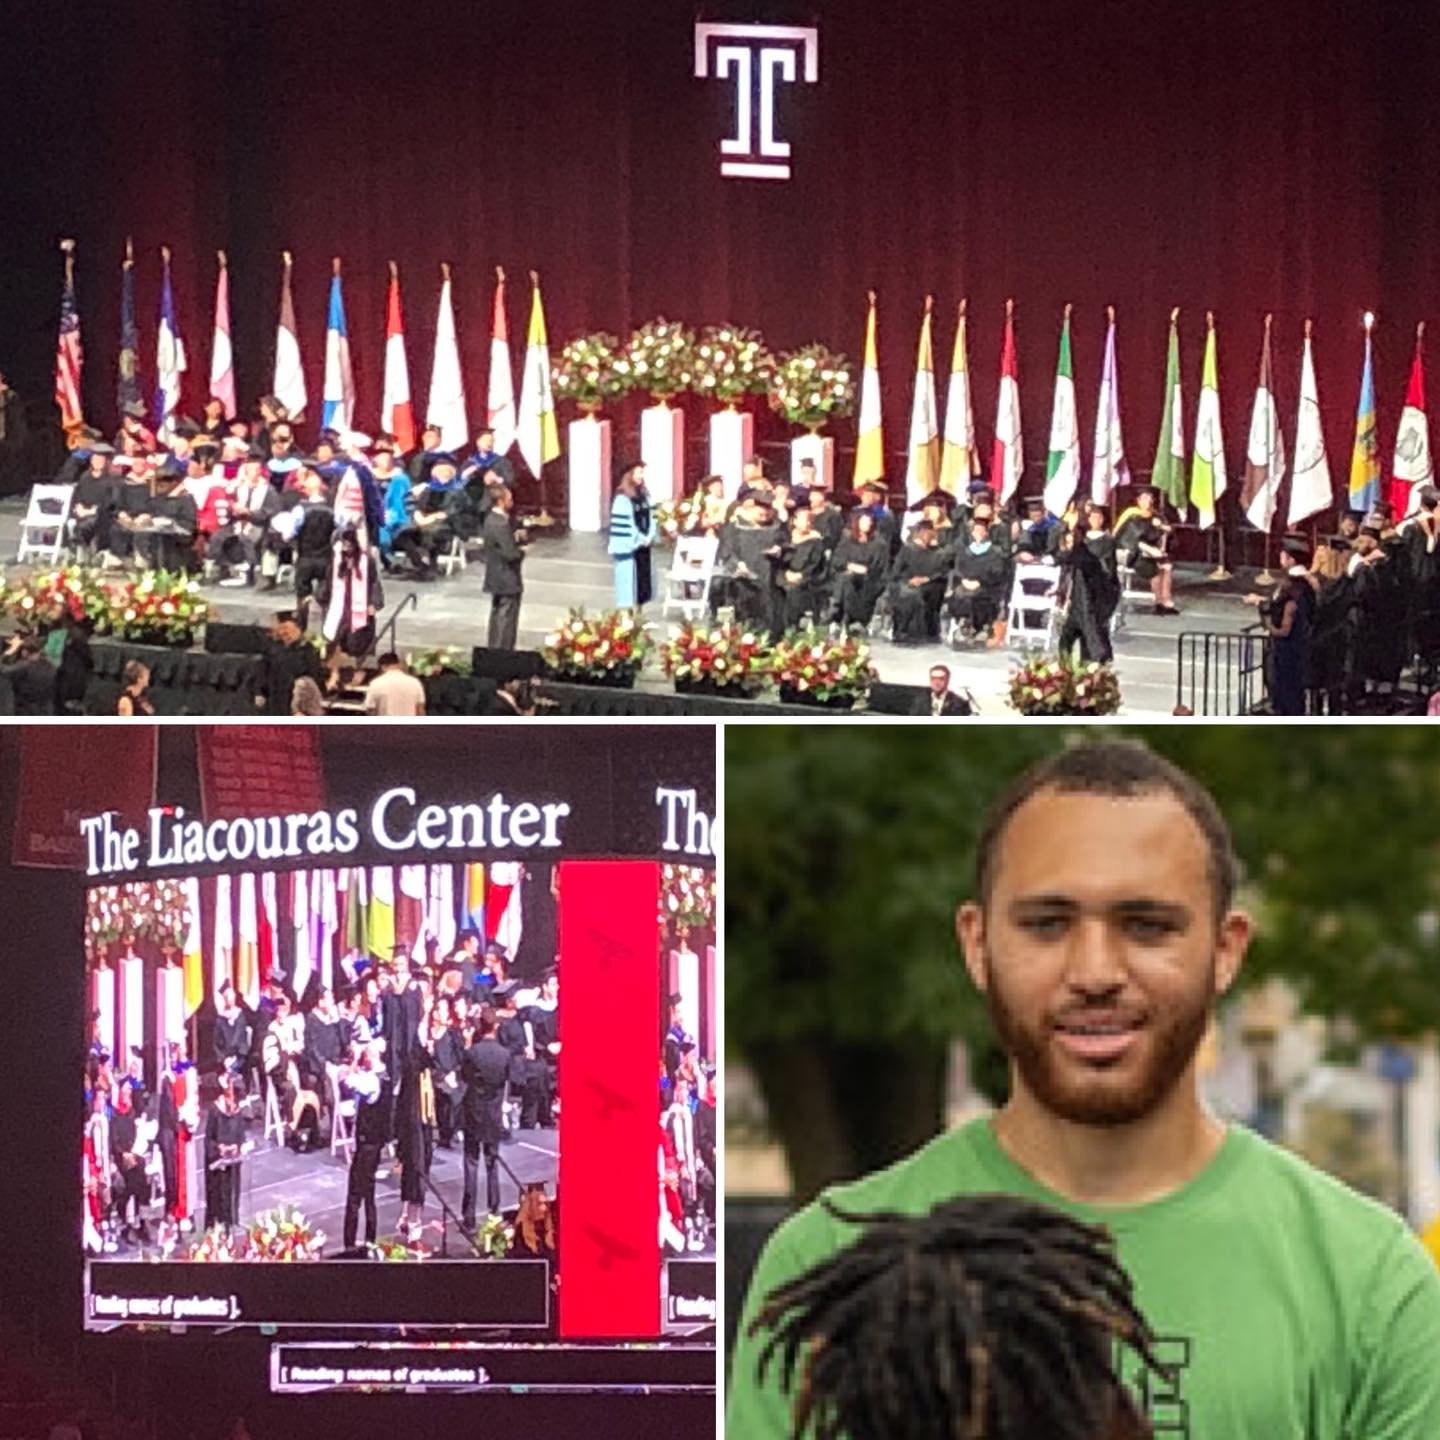 Say CONGRATS to Cam - our Community Book Distributor on his #graduation from Temple University Fox School of Business! We love you Cam and are so proud to have watched you cross that stage!

Temple University Fox Online

#graduate #TEMPLEU #graduatio